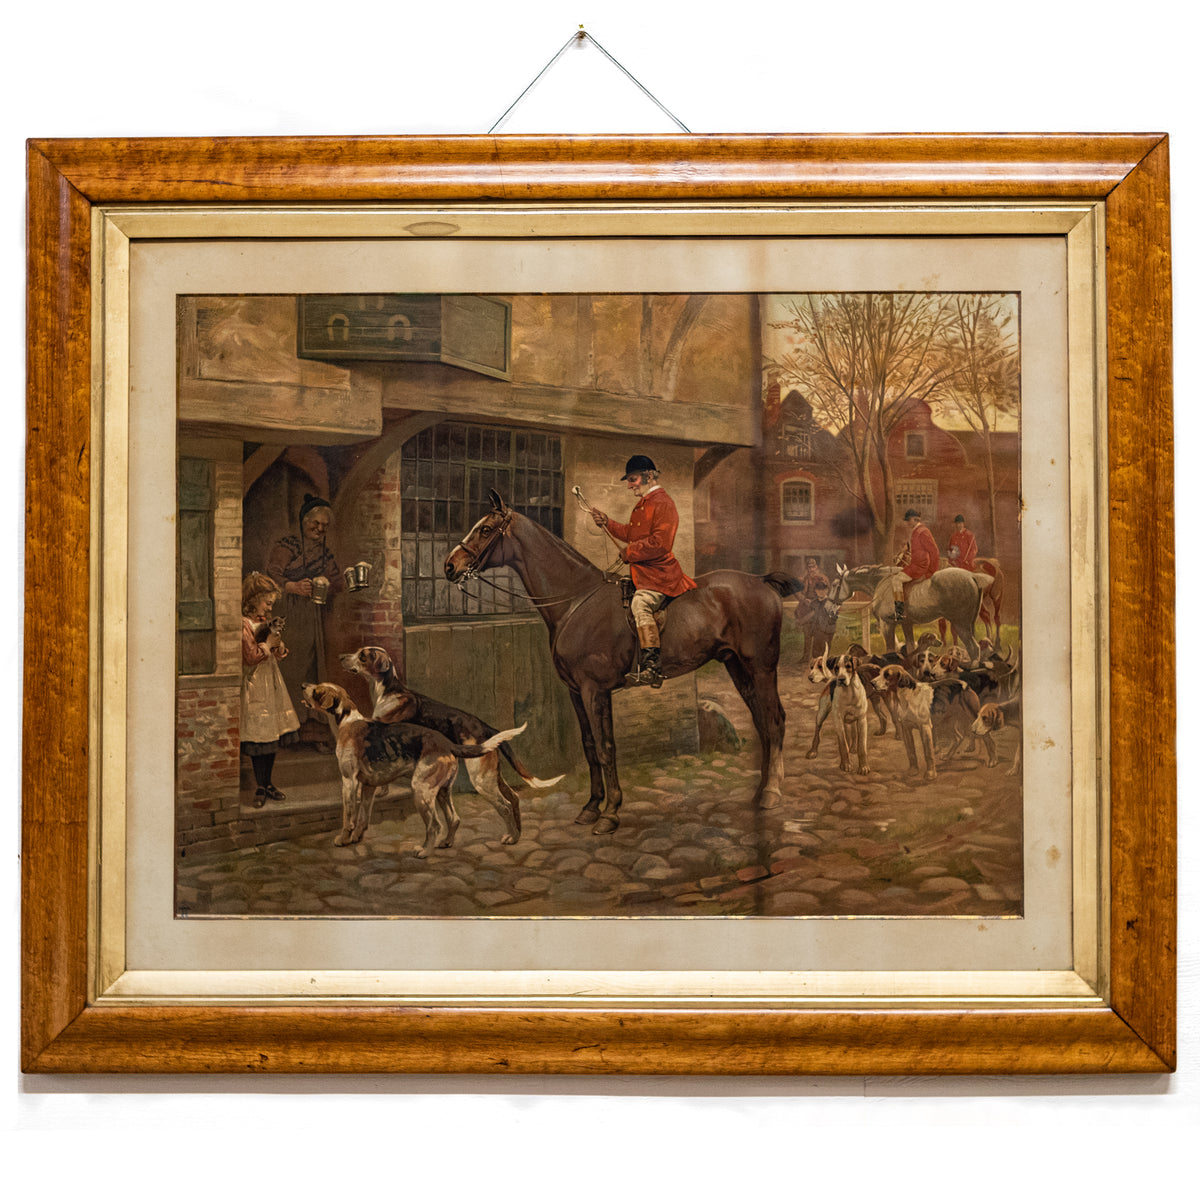 Large Antique Hunting Scene Print in Maple Frame | Bristol Print | The Architectural Forum